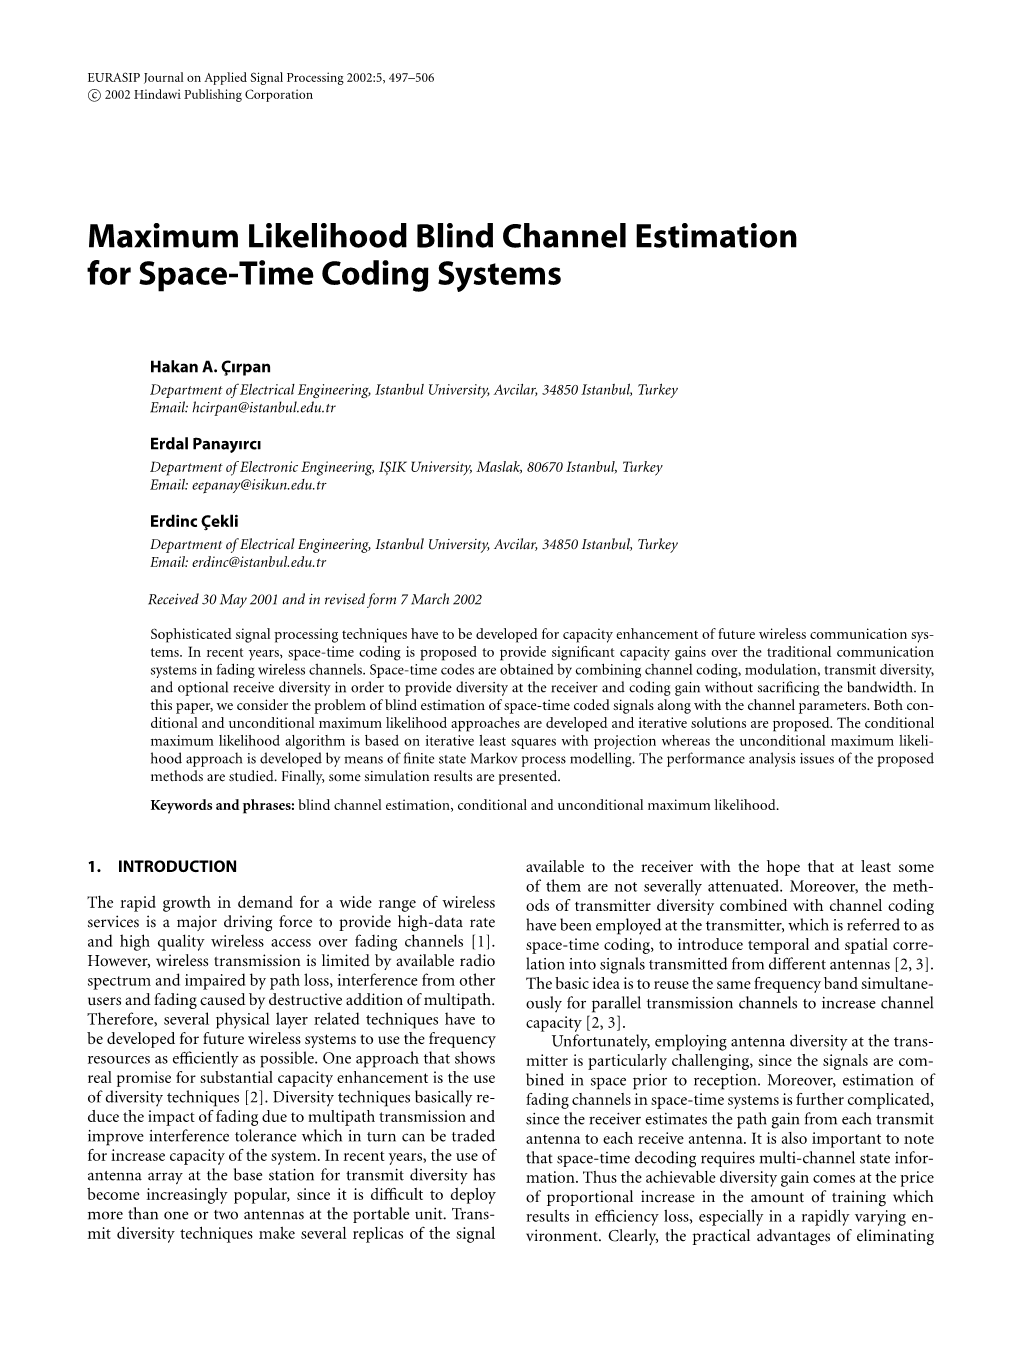 Maximum Likelihood Blind Channel Estimation for Space-Time Coding Systems